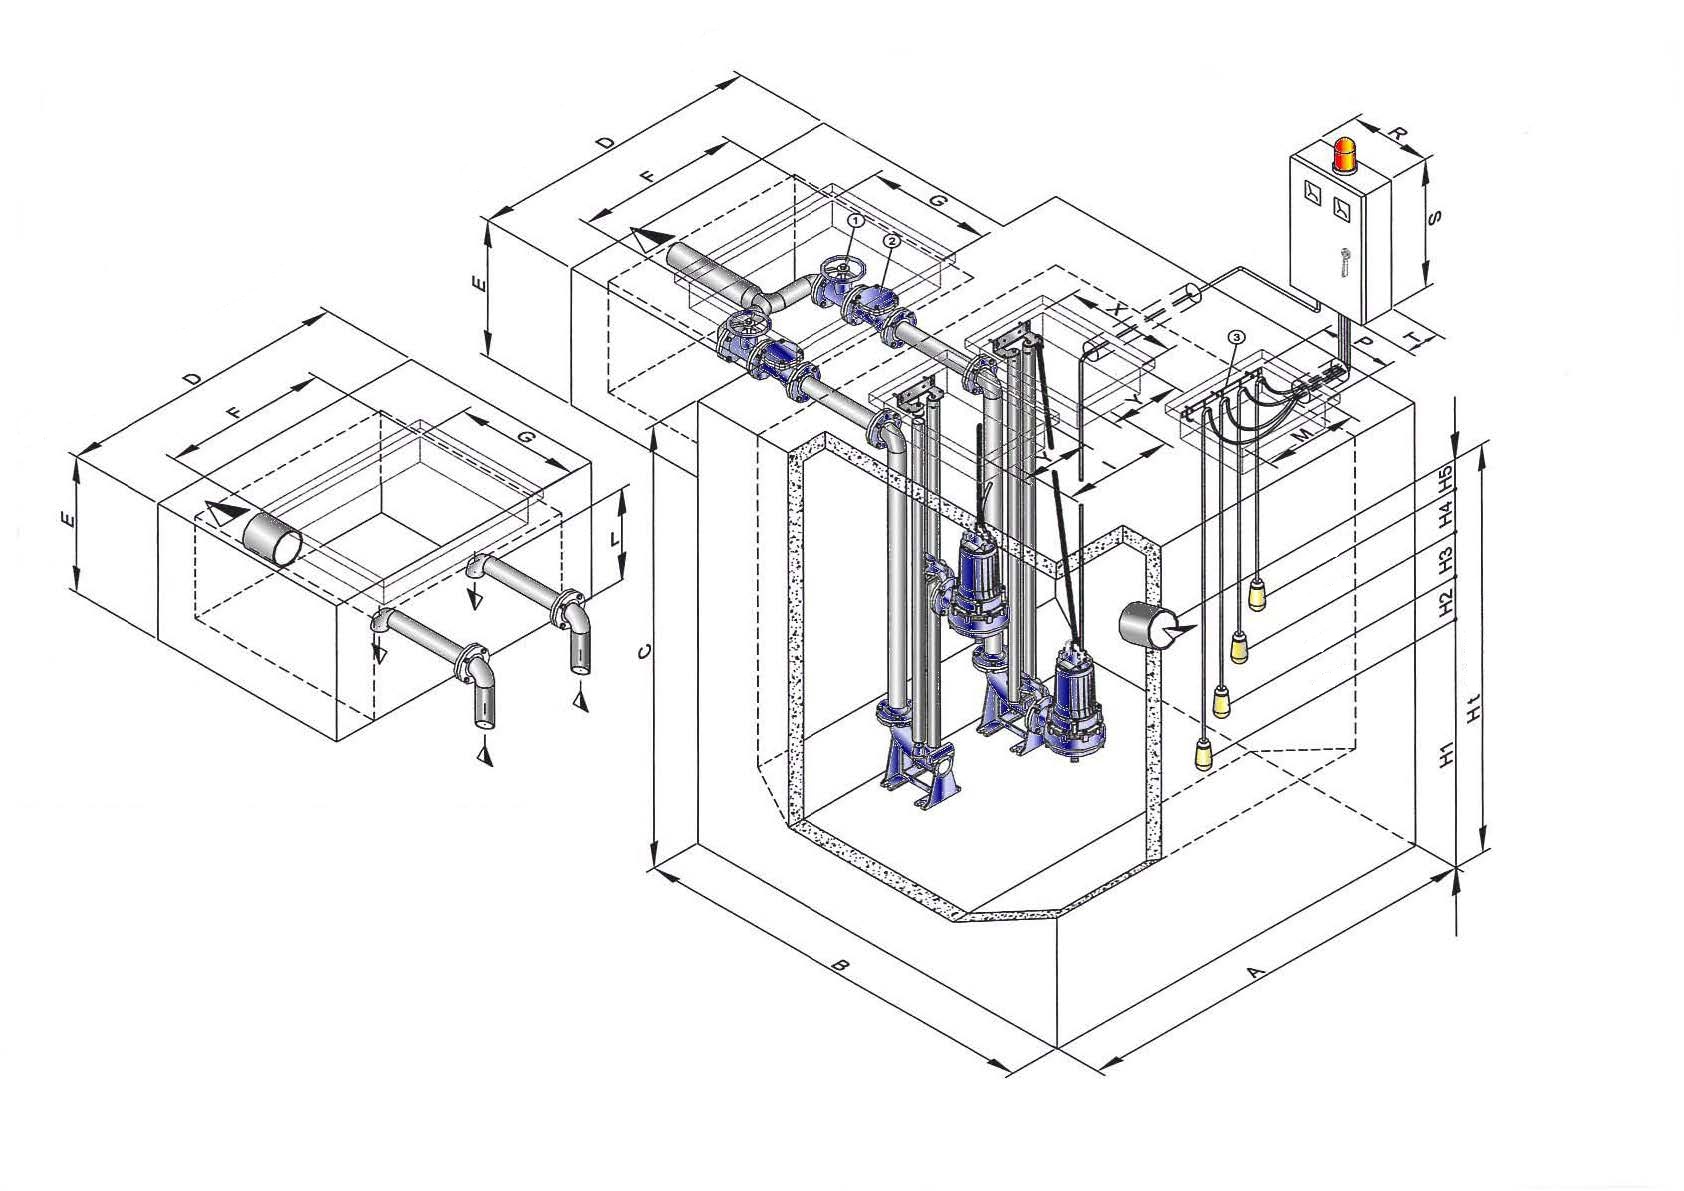 CAD drawing of pump system plan